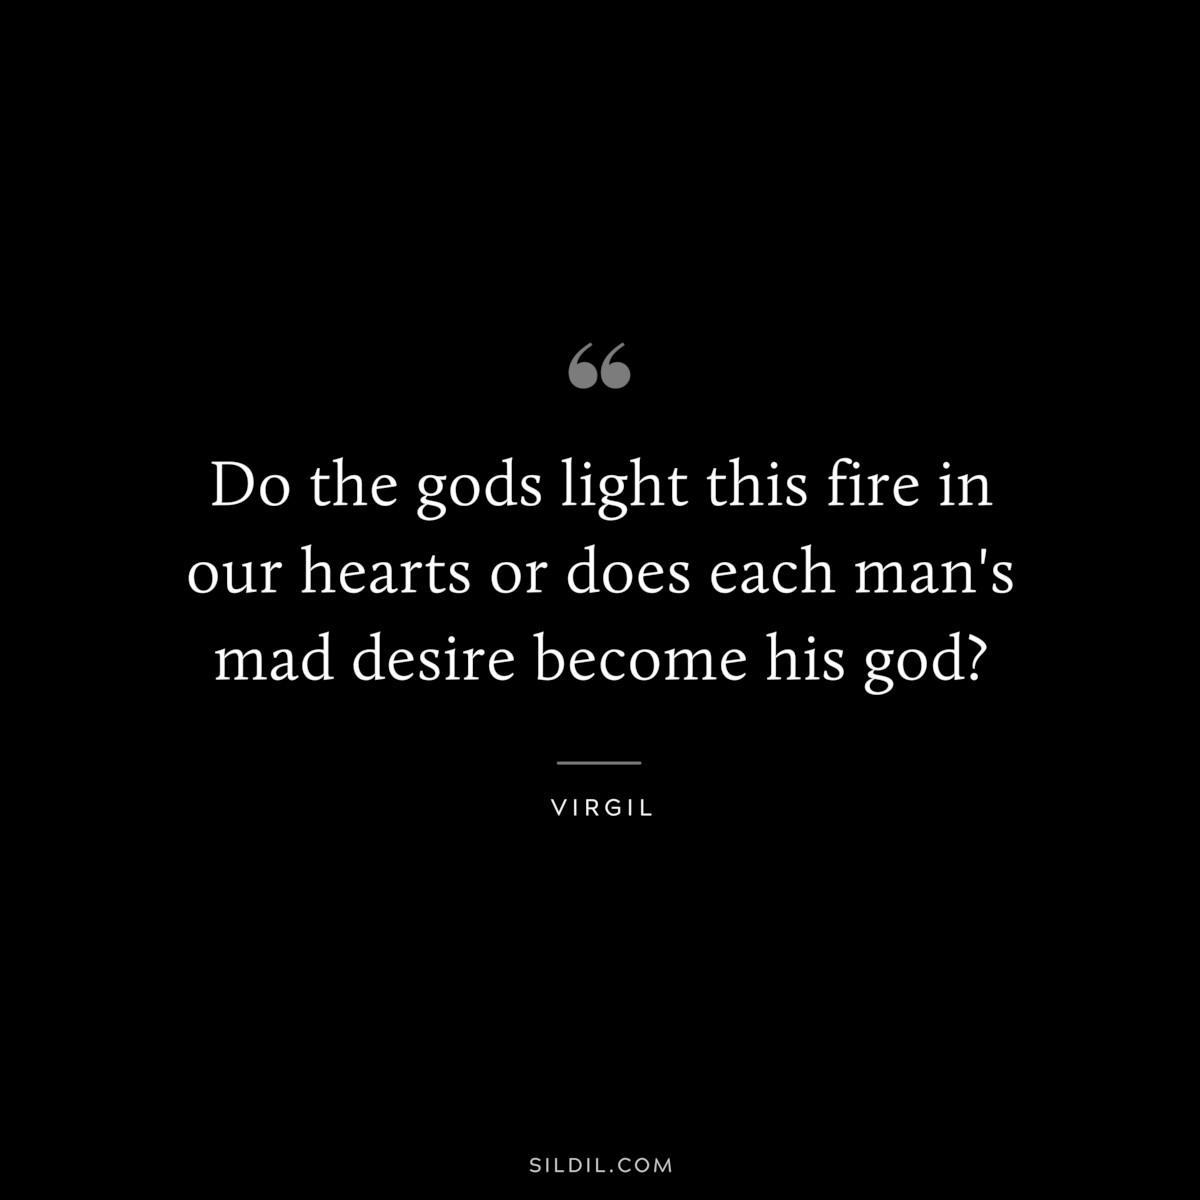 Do the gods light this fire in our hearts or does each man's mad desire become his god? ― Virgil